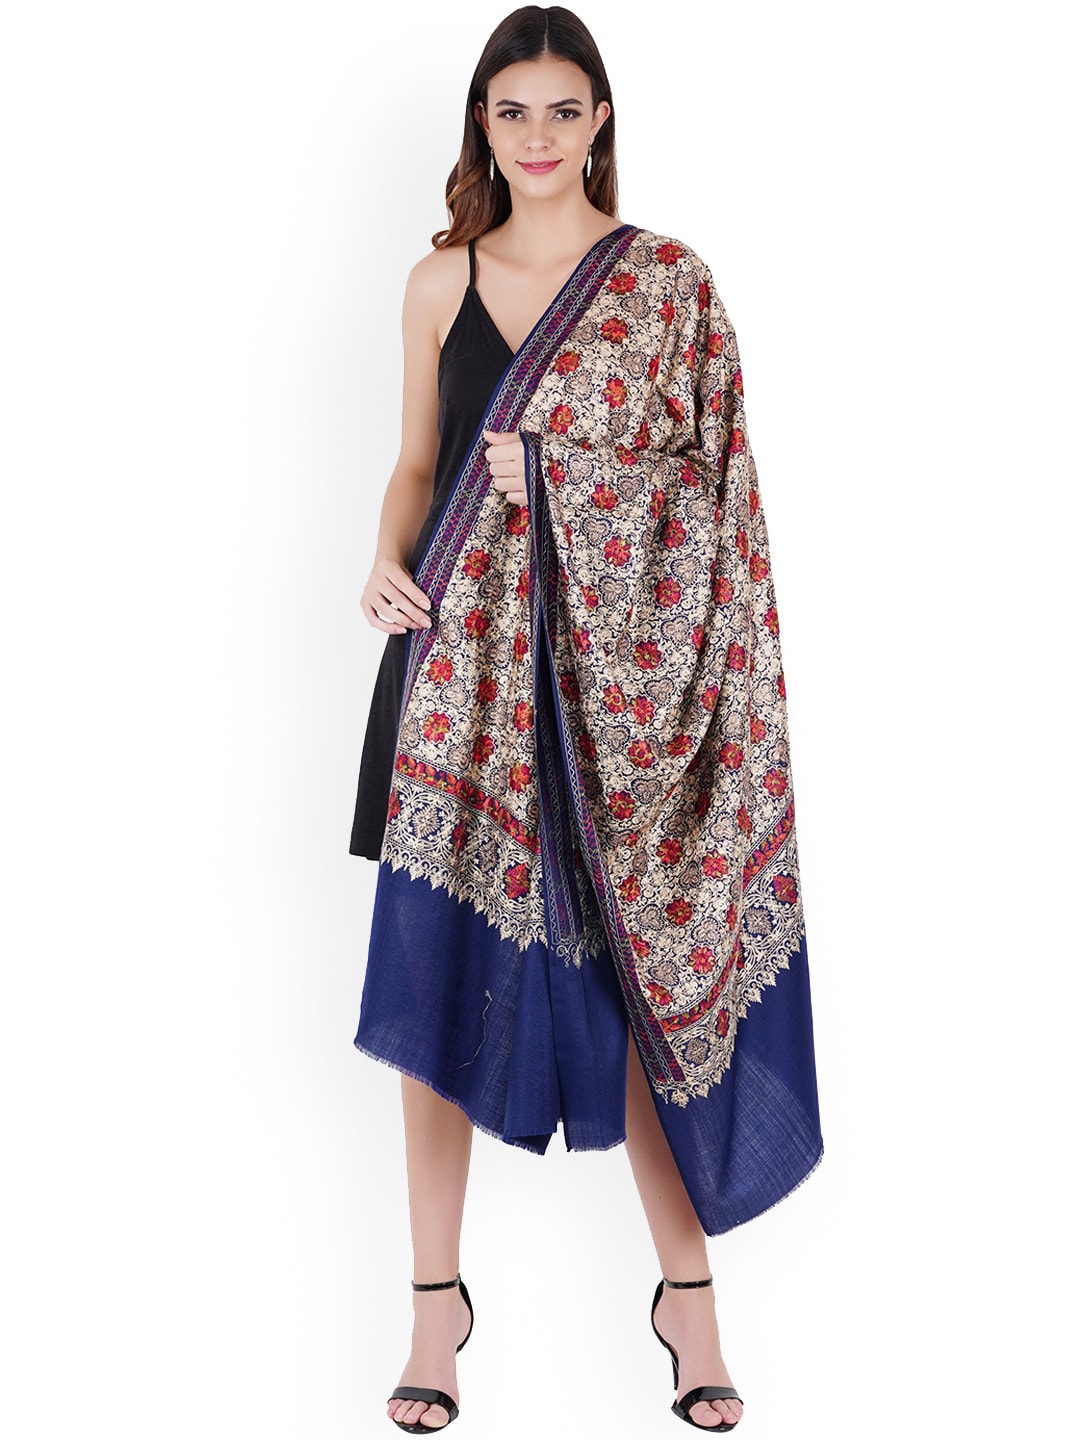 MUFFLY Blue Embroidered Silky Pashmina Wool Shawl With Nalki Border Price in India